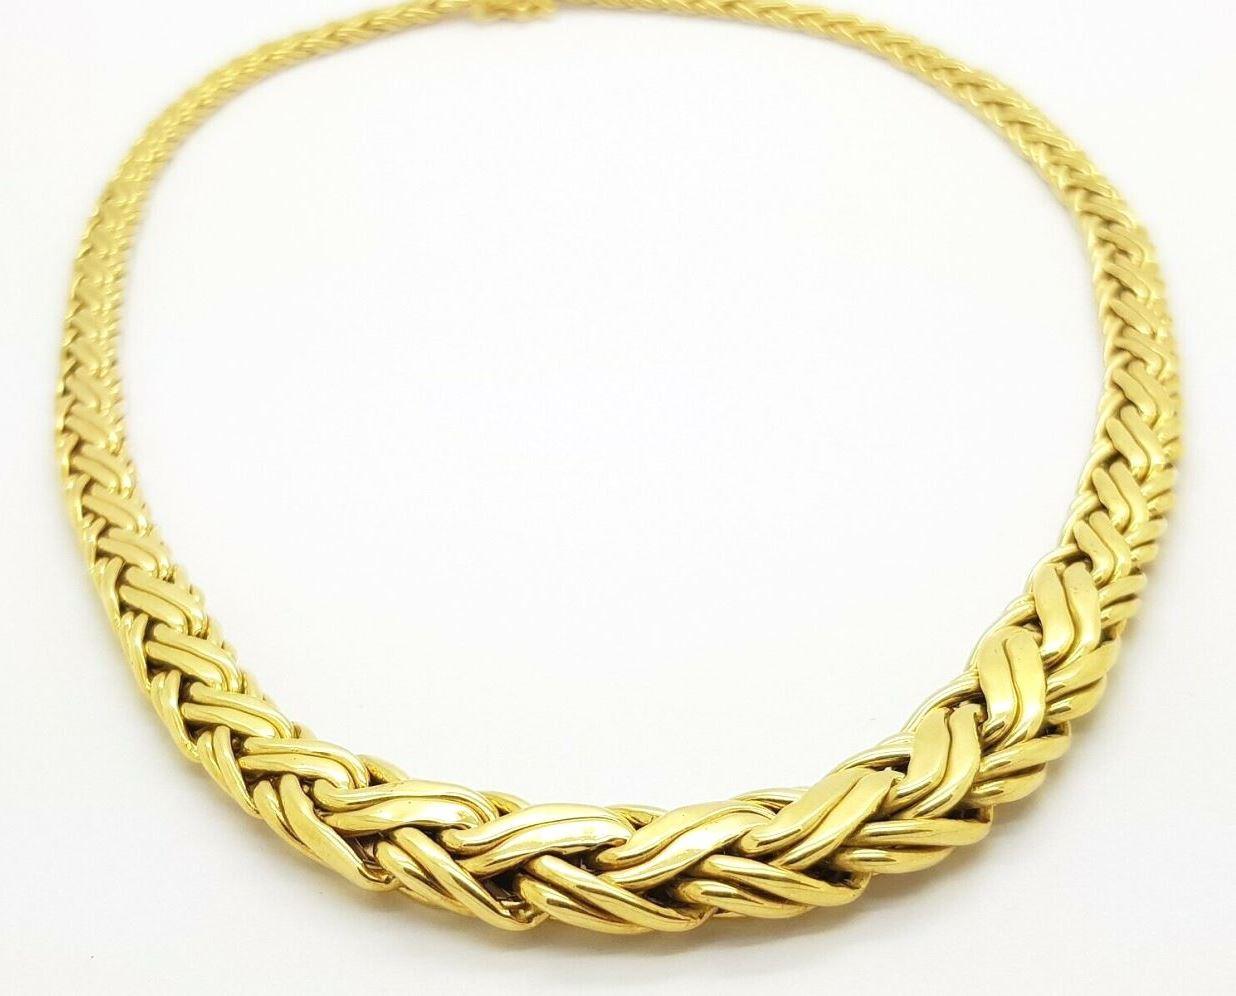 TIFFANY & Co. 18K Gold Graduated Weave Necklace 

Metal: 18K yellow gold
Weight: 38.10 grams
Length: 16.25